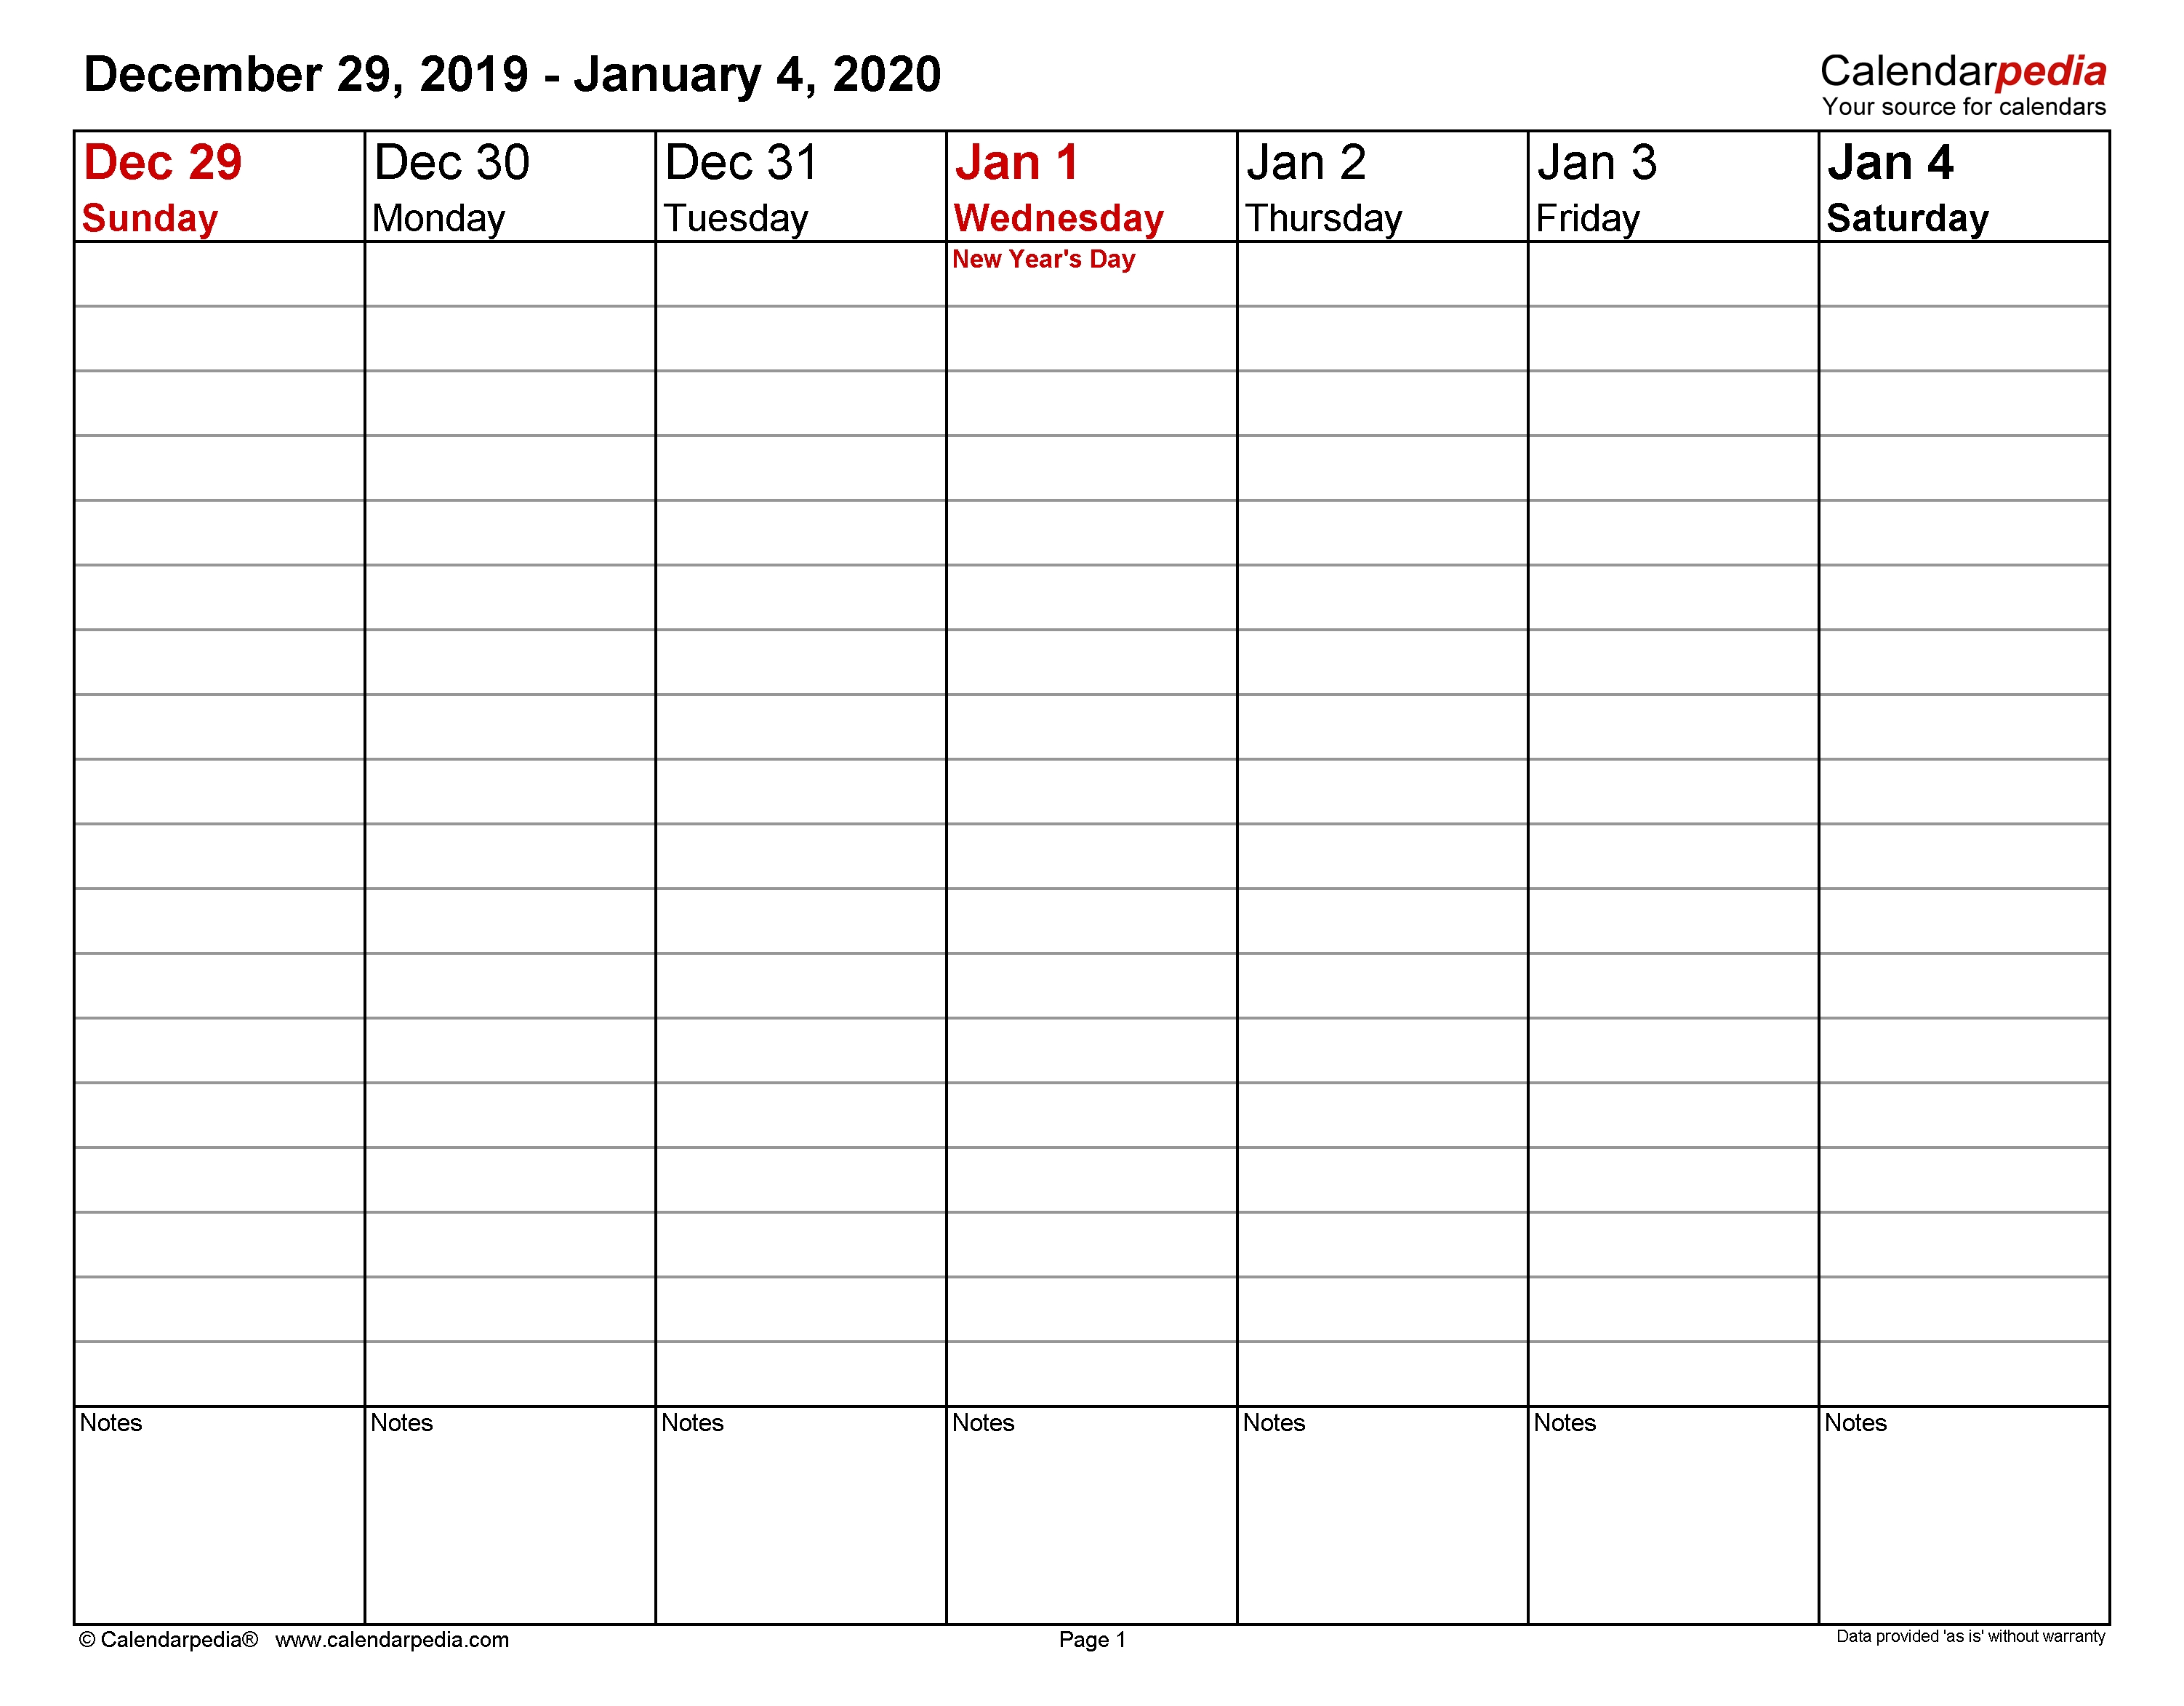 Weekly Calendars 2020 For Excel - 12 Free Printable Templates